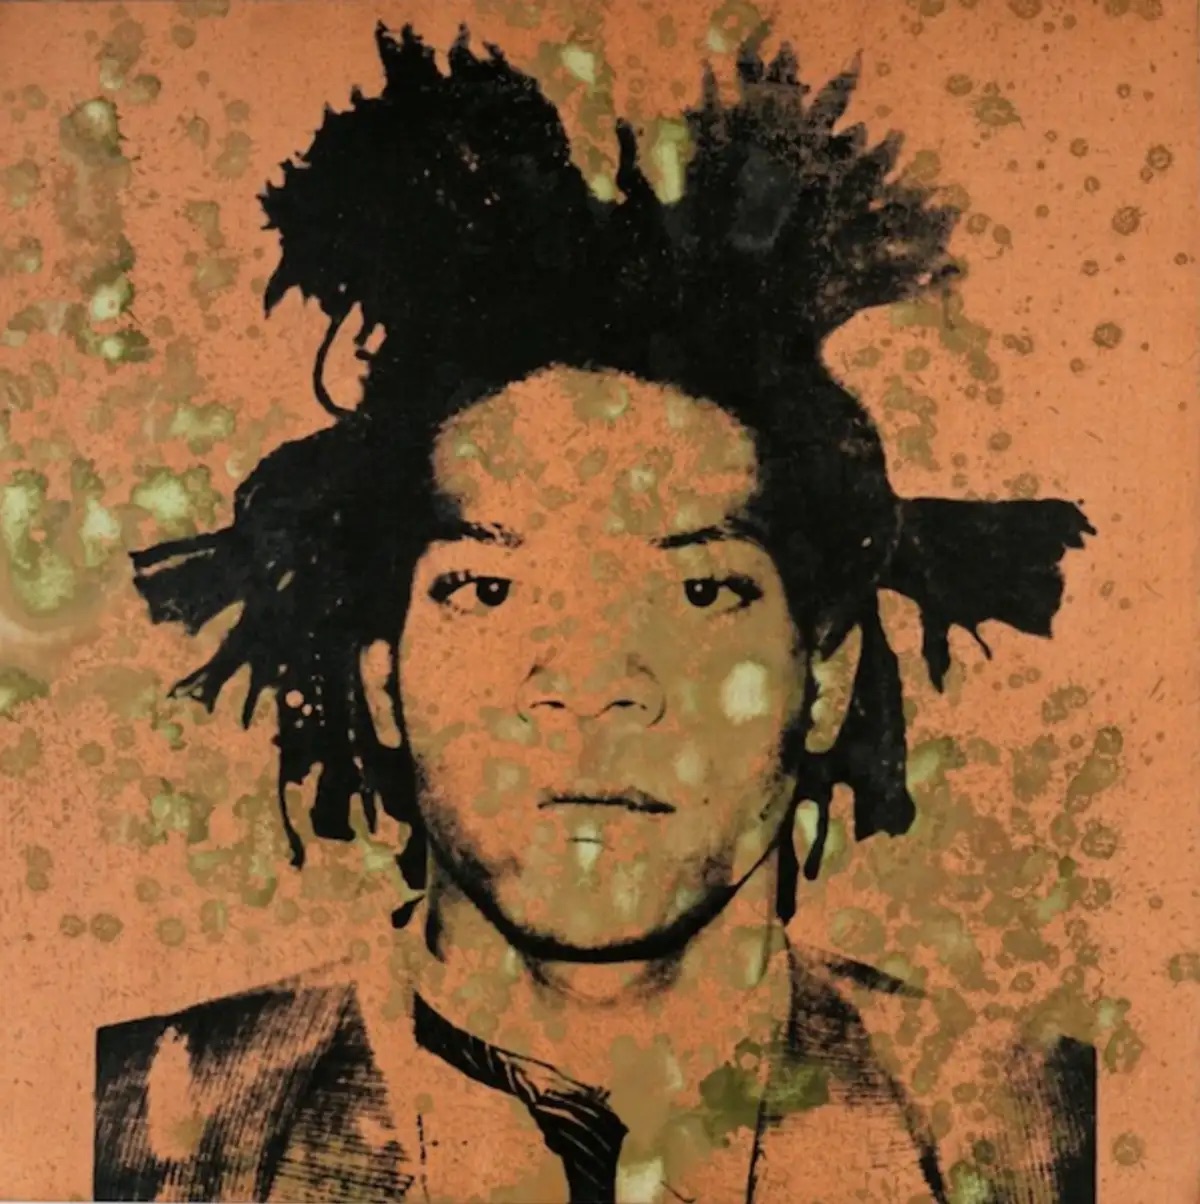 The Portrait of Basquiat by Warhol, fruition of their partnership, that sold for $34,700,000. (Image © Christie's : Jean-Michel Basquiat © Andy Warhol 1982)